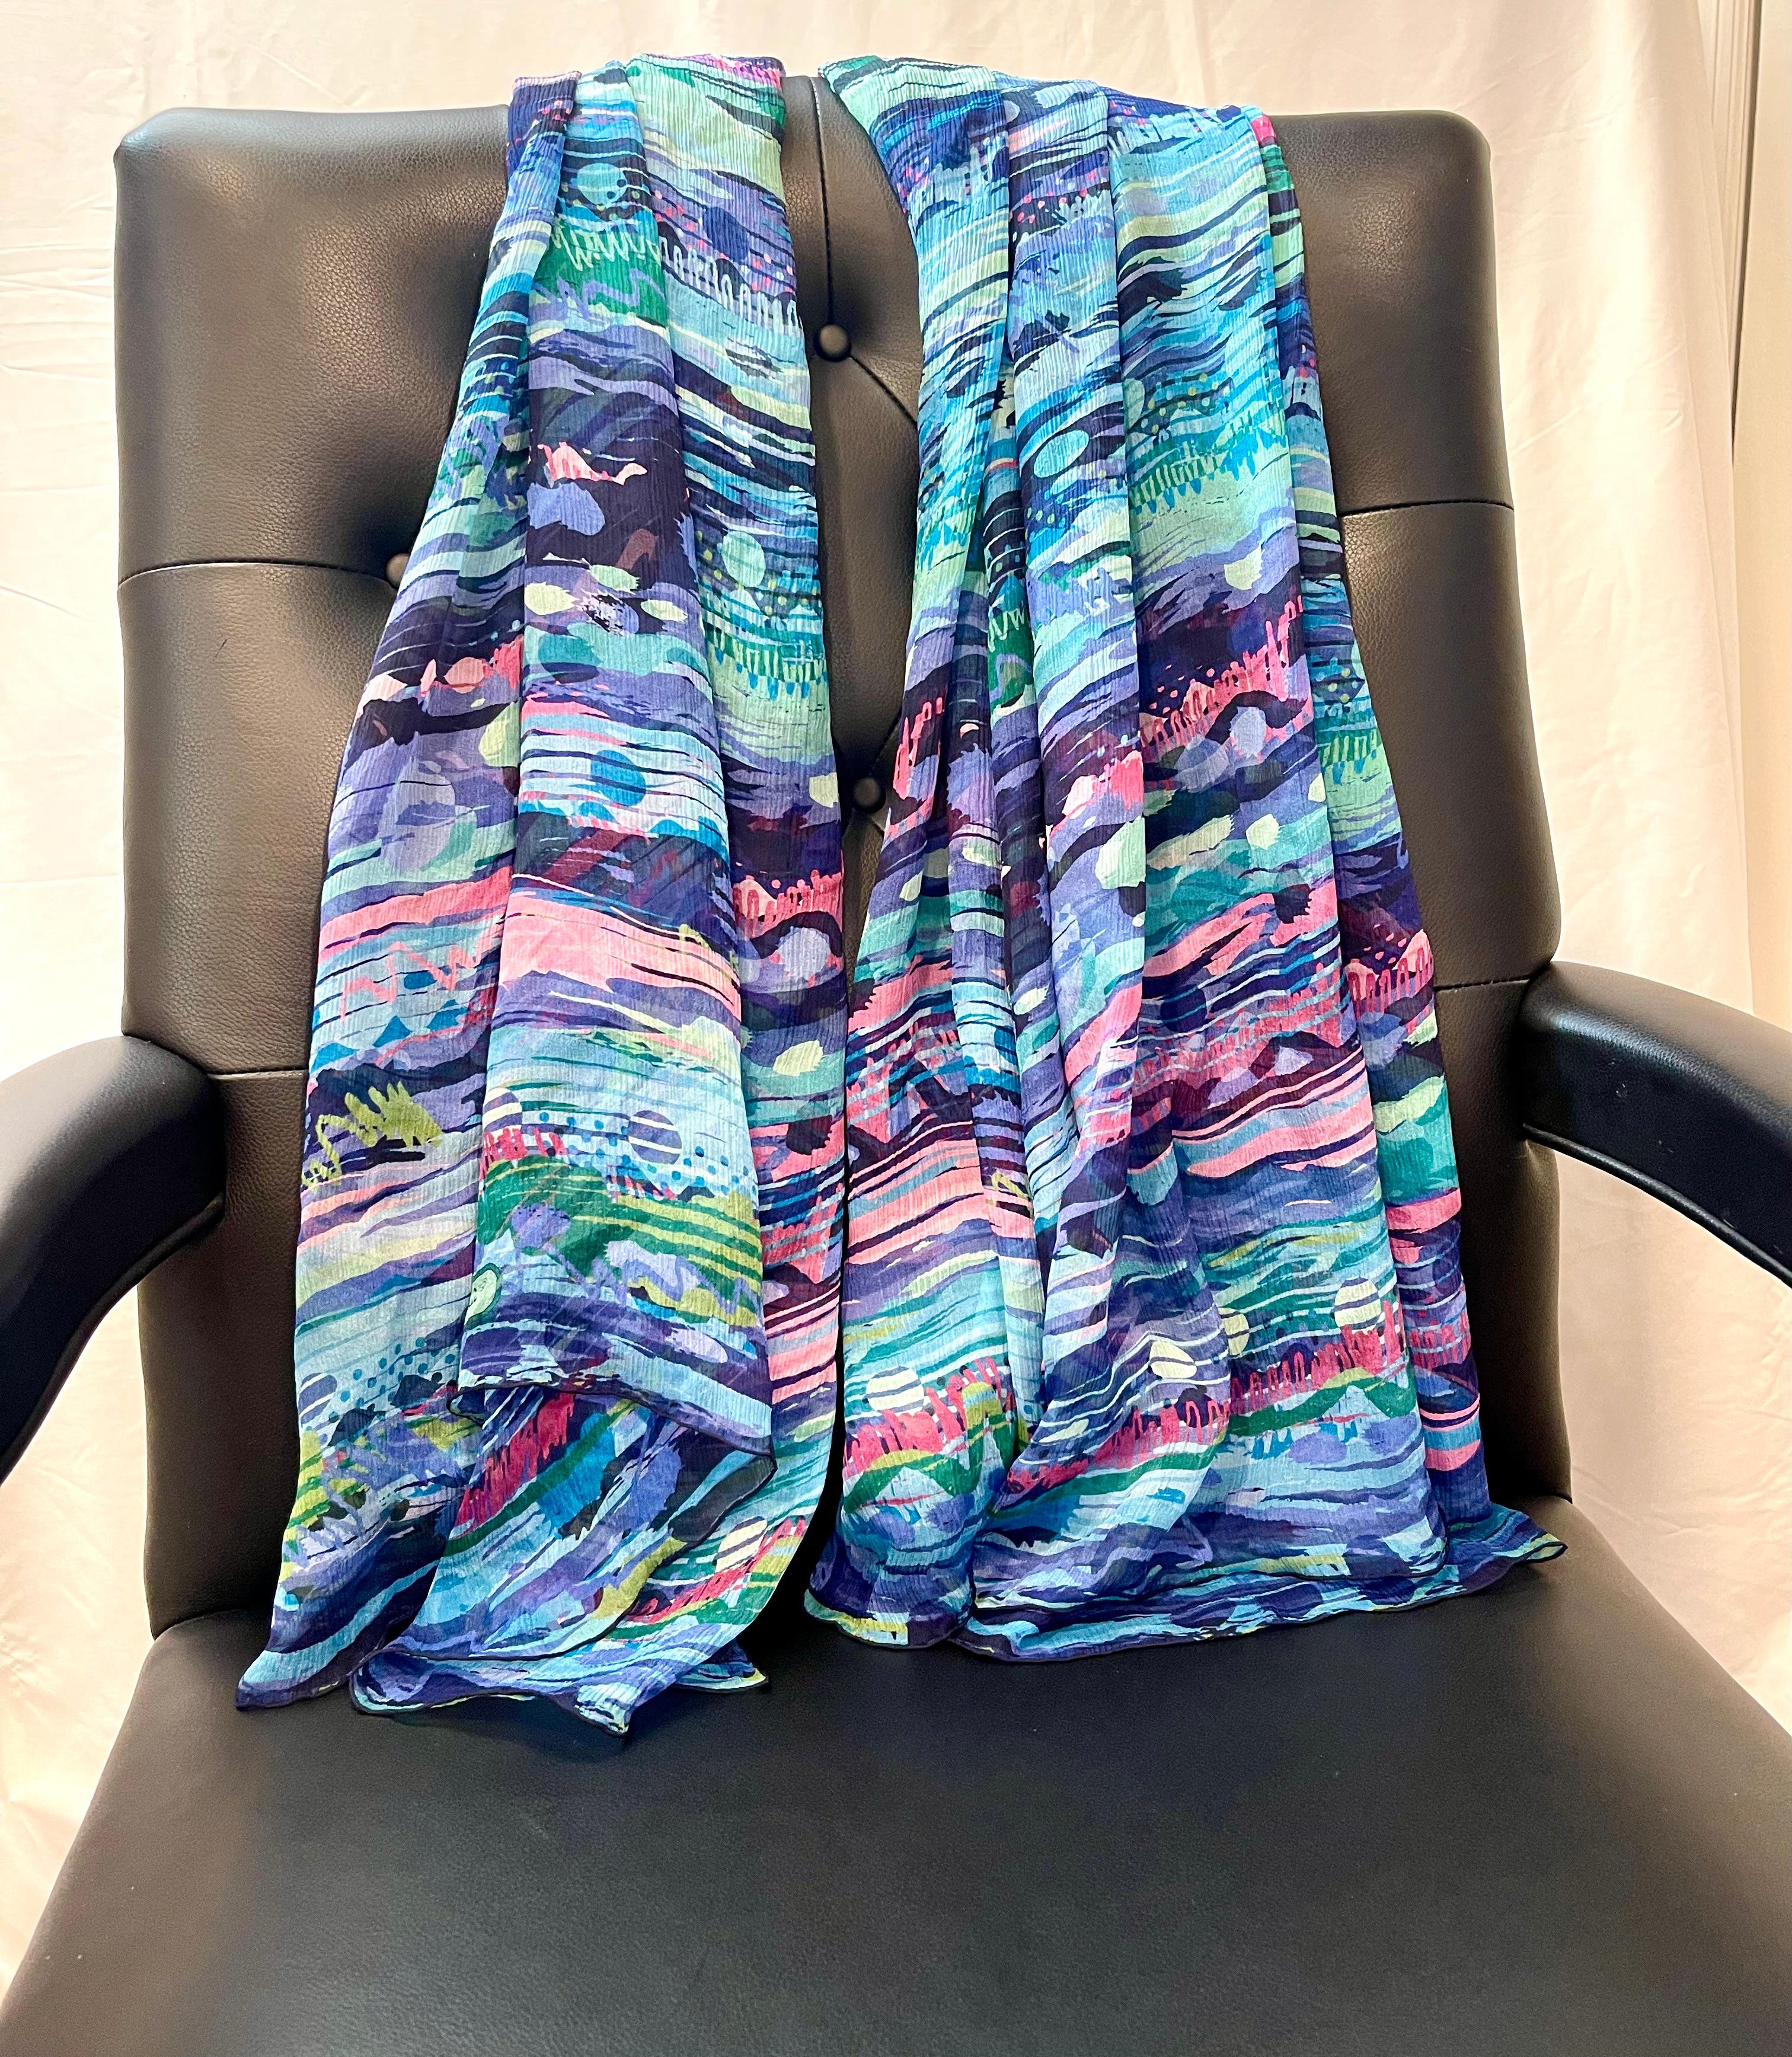 Salvatore Ferragamo Blue Marine Silk Modern Print Scarf, Extra Long
Pre Loved
Extra long scarf with floral print with a bucolic feel. The ethereal lightness of silk emphasizes the femininity and refinement of an ultra versatile accessory, a perfect